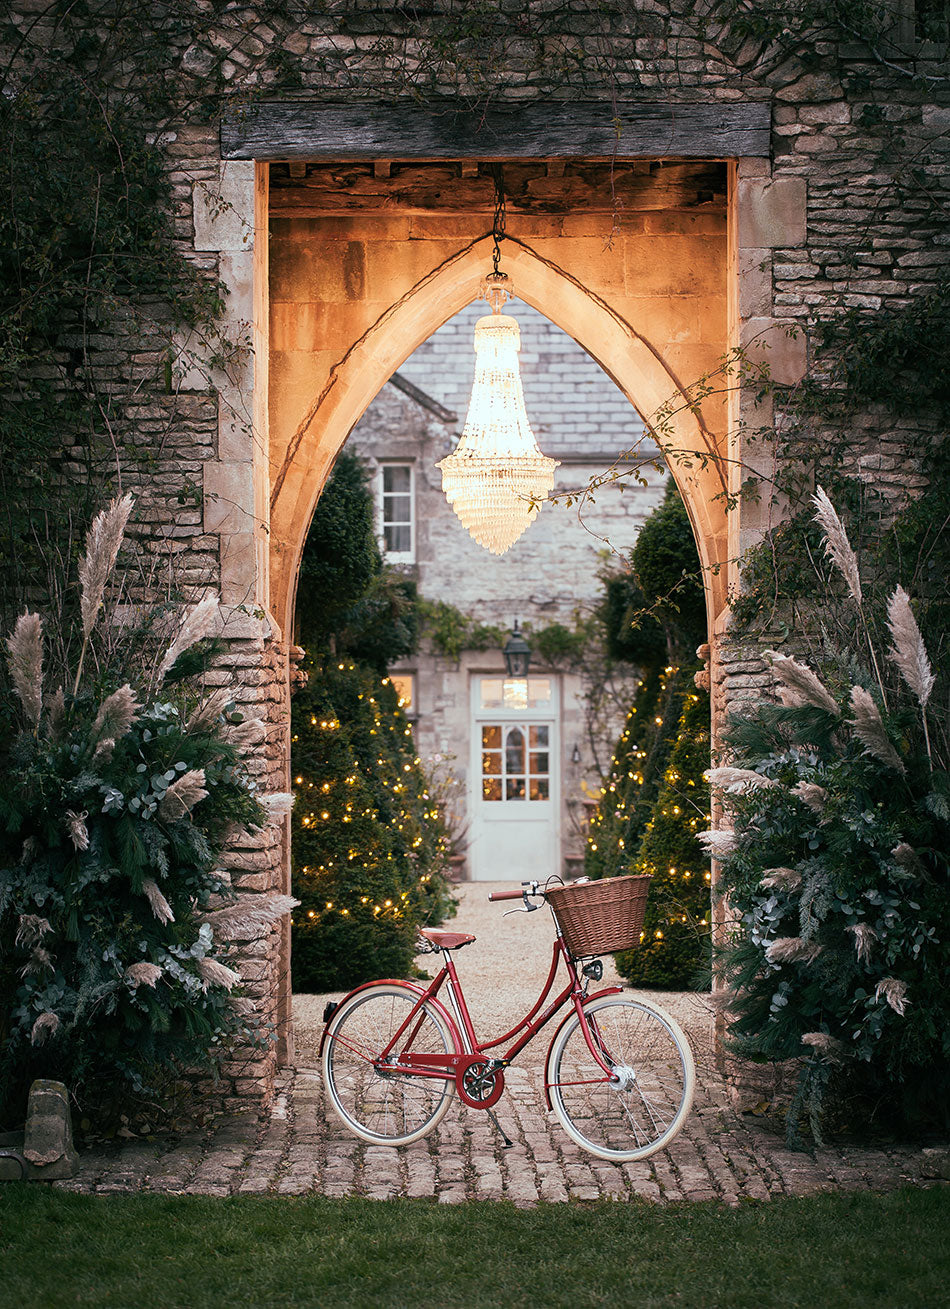 A red Britannia bicycle sat beneath a chandelier hanging from a large stone arch in grand gardens at dusk.